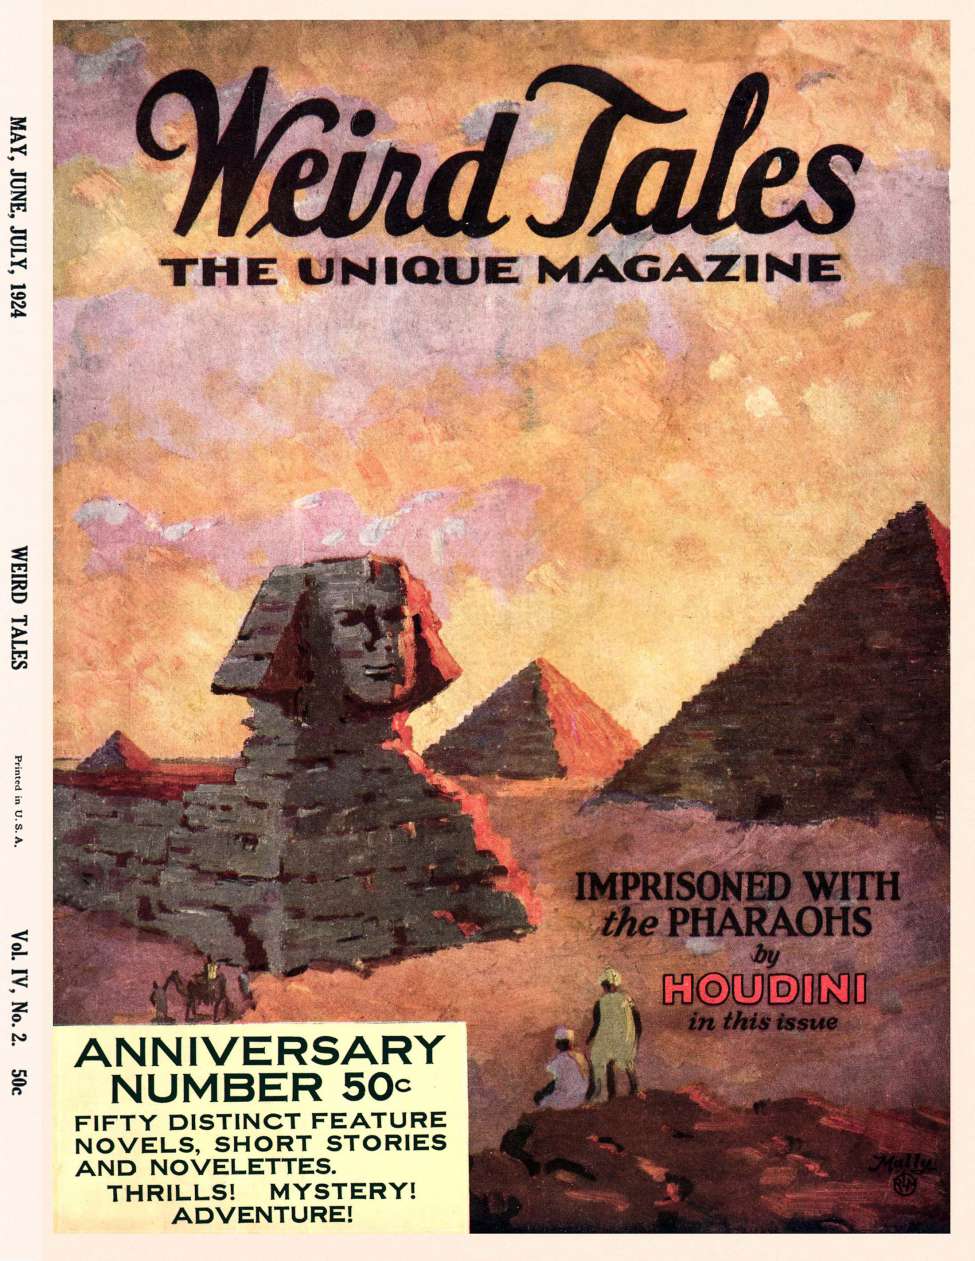 Book Cover For Weird Tales v4 2 - Imprisoned With The Pharaohs - Houdini